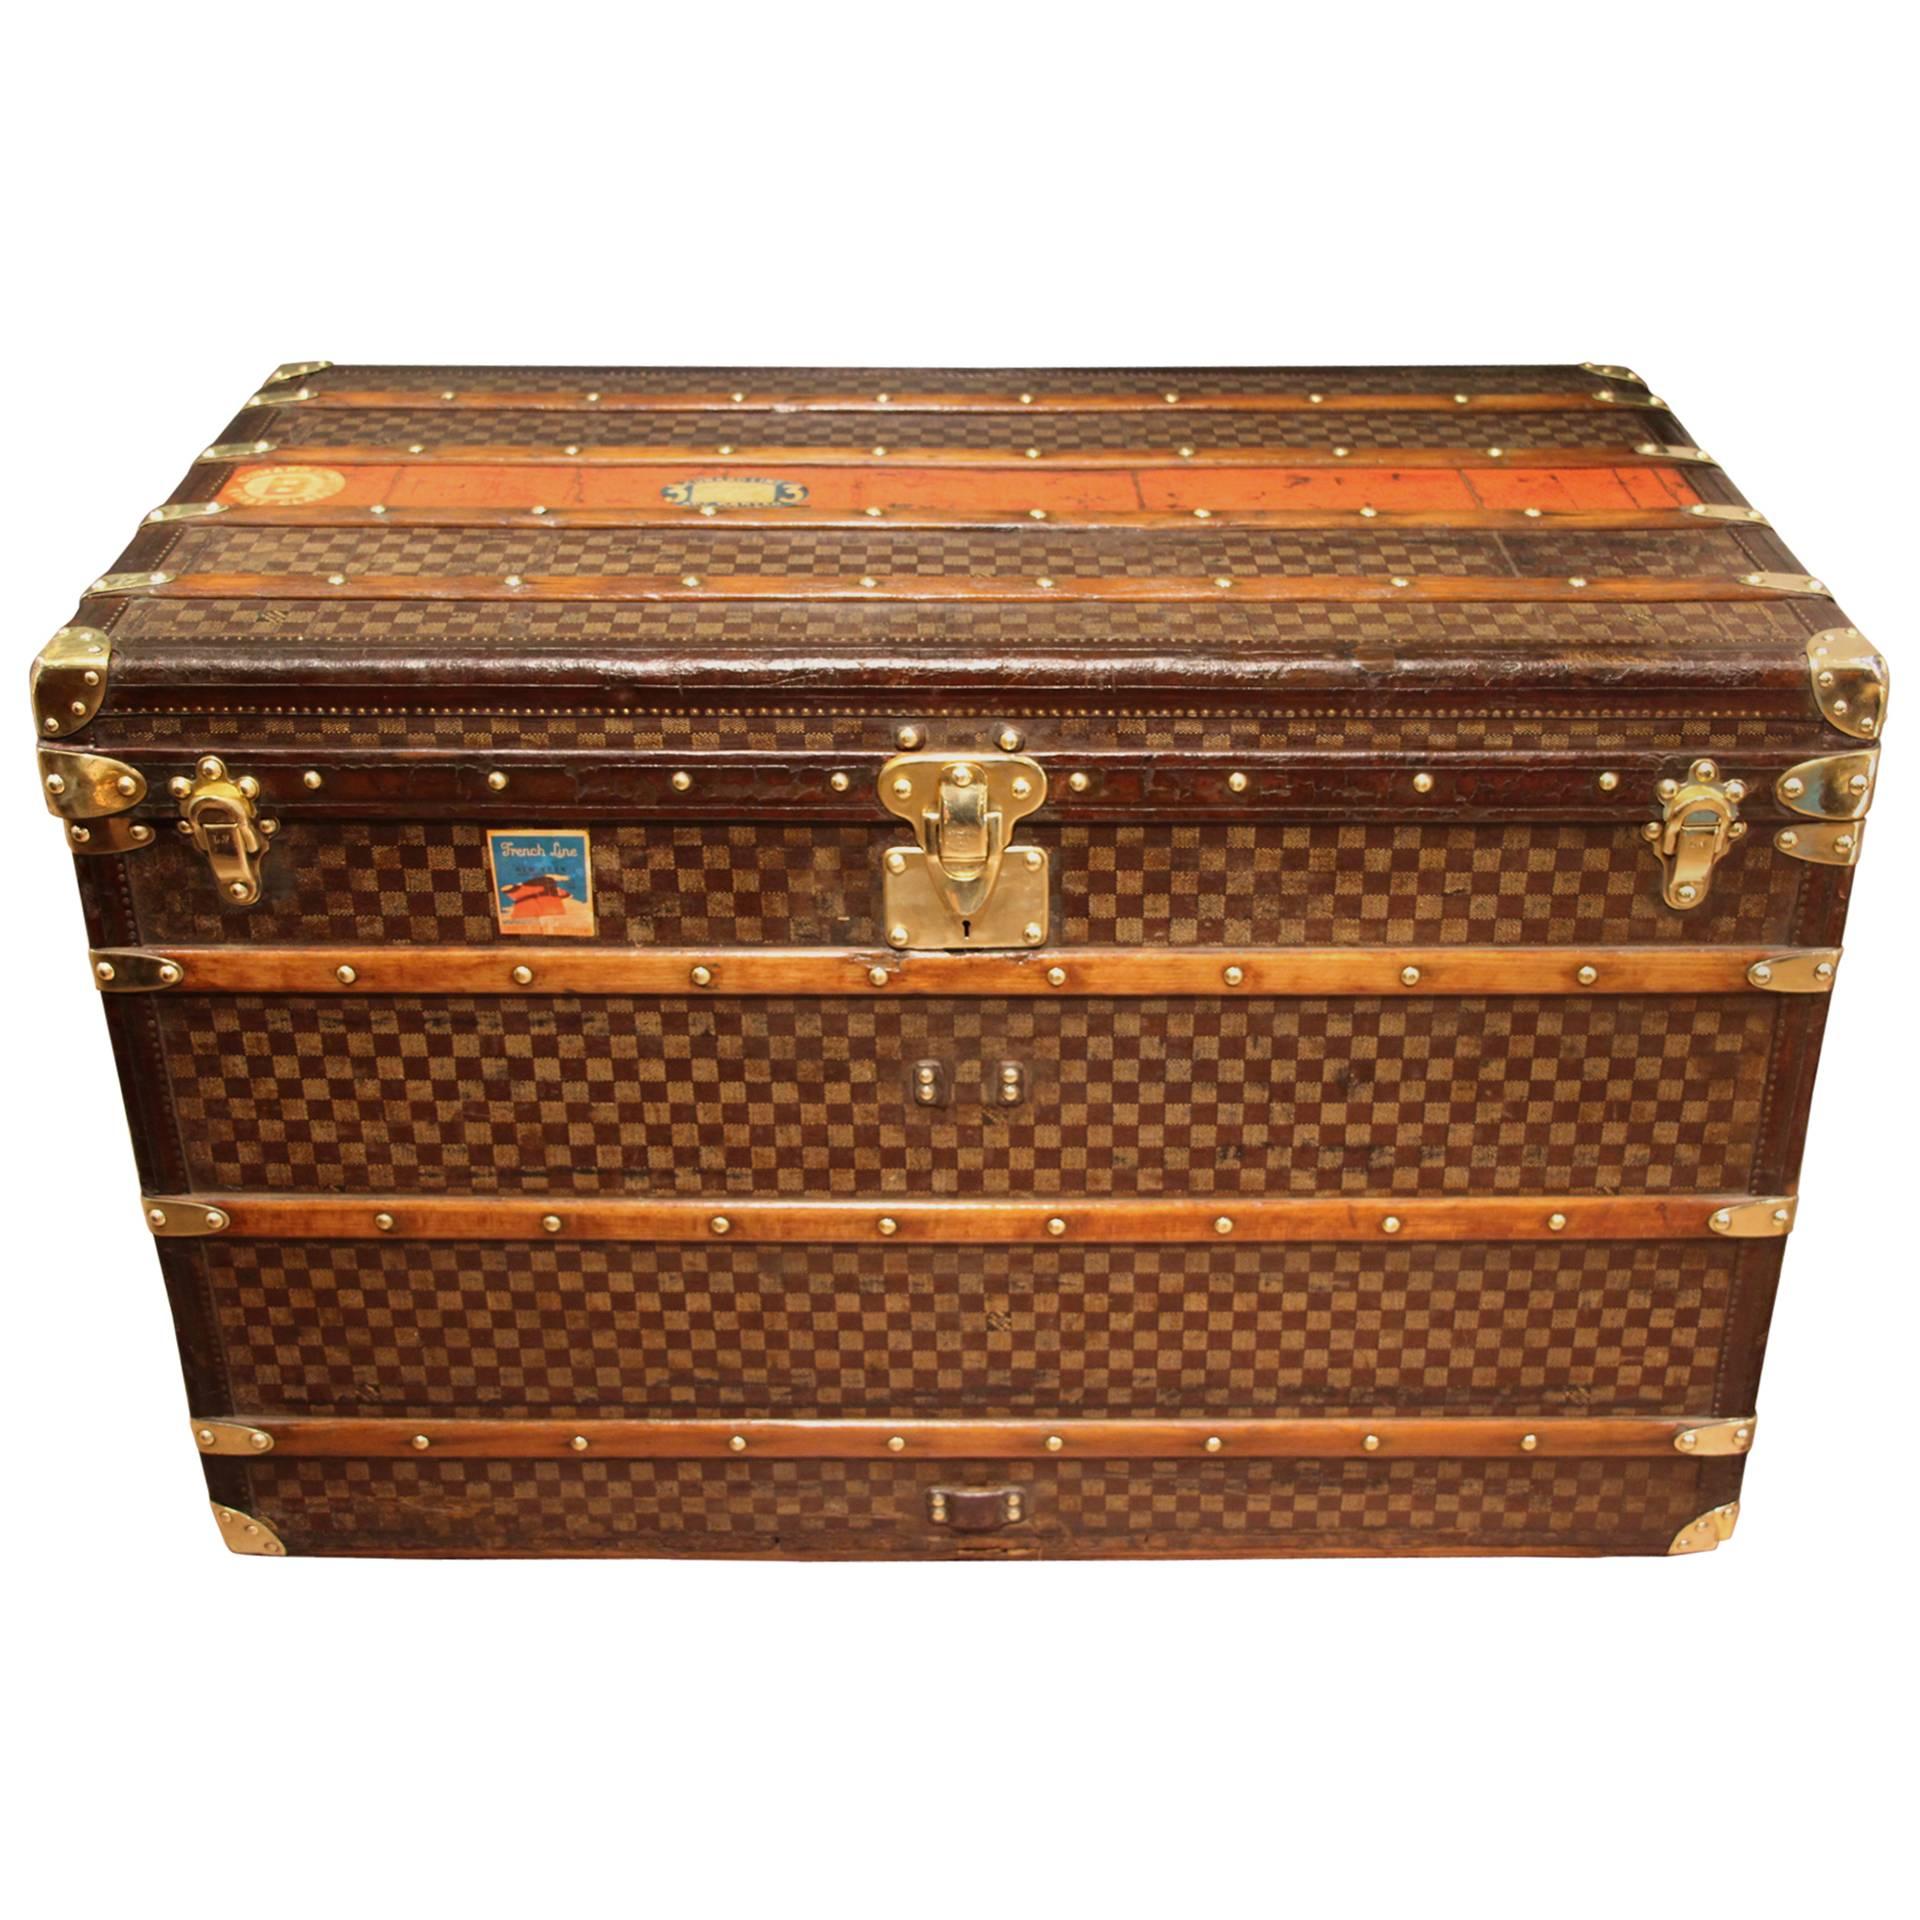 1890s Extra Large Louis Vuitton Checkers Monogram Steamer Trunk, Leather Trim